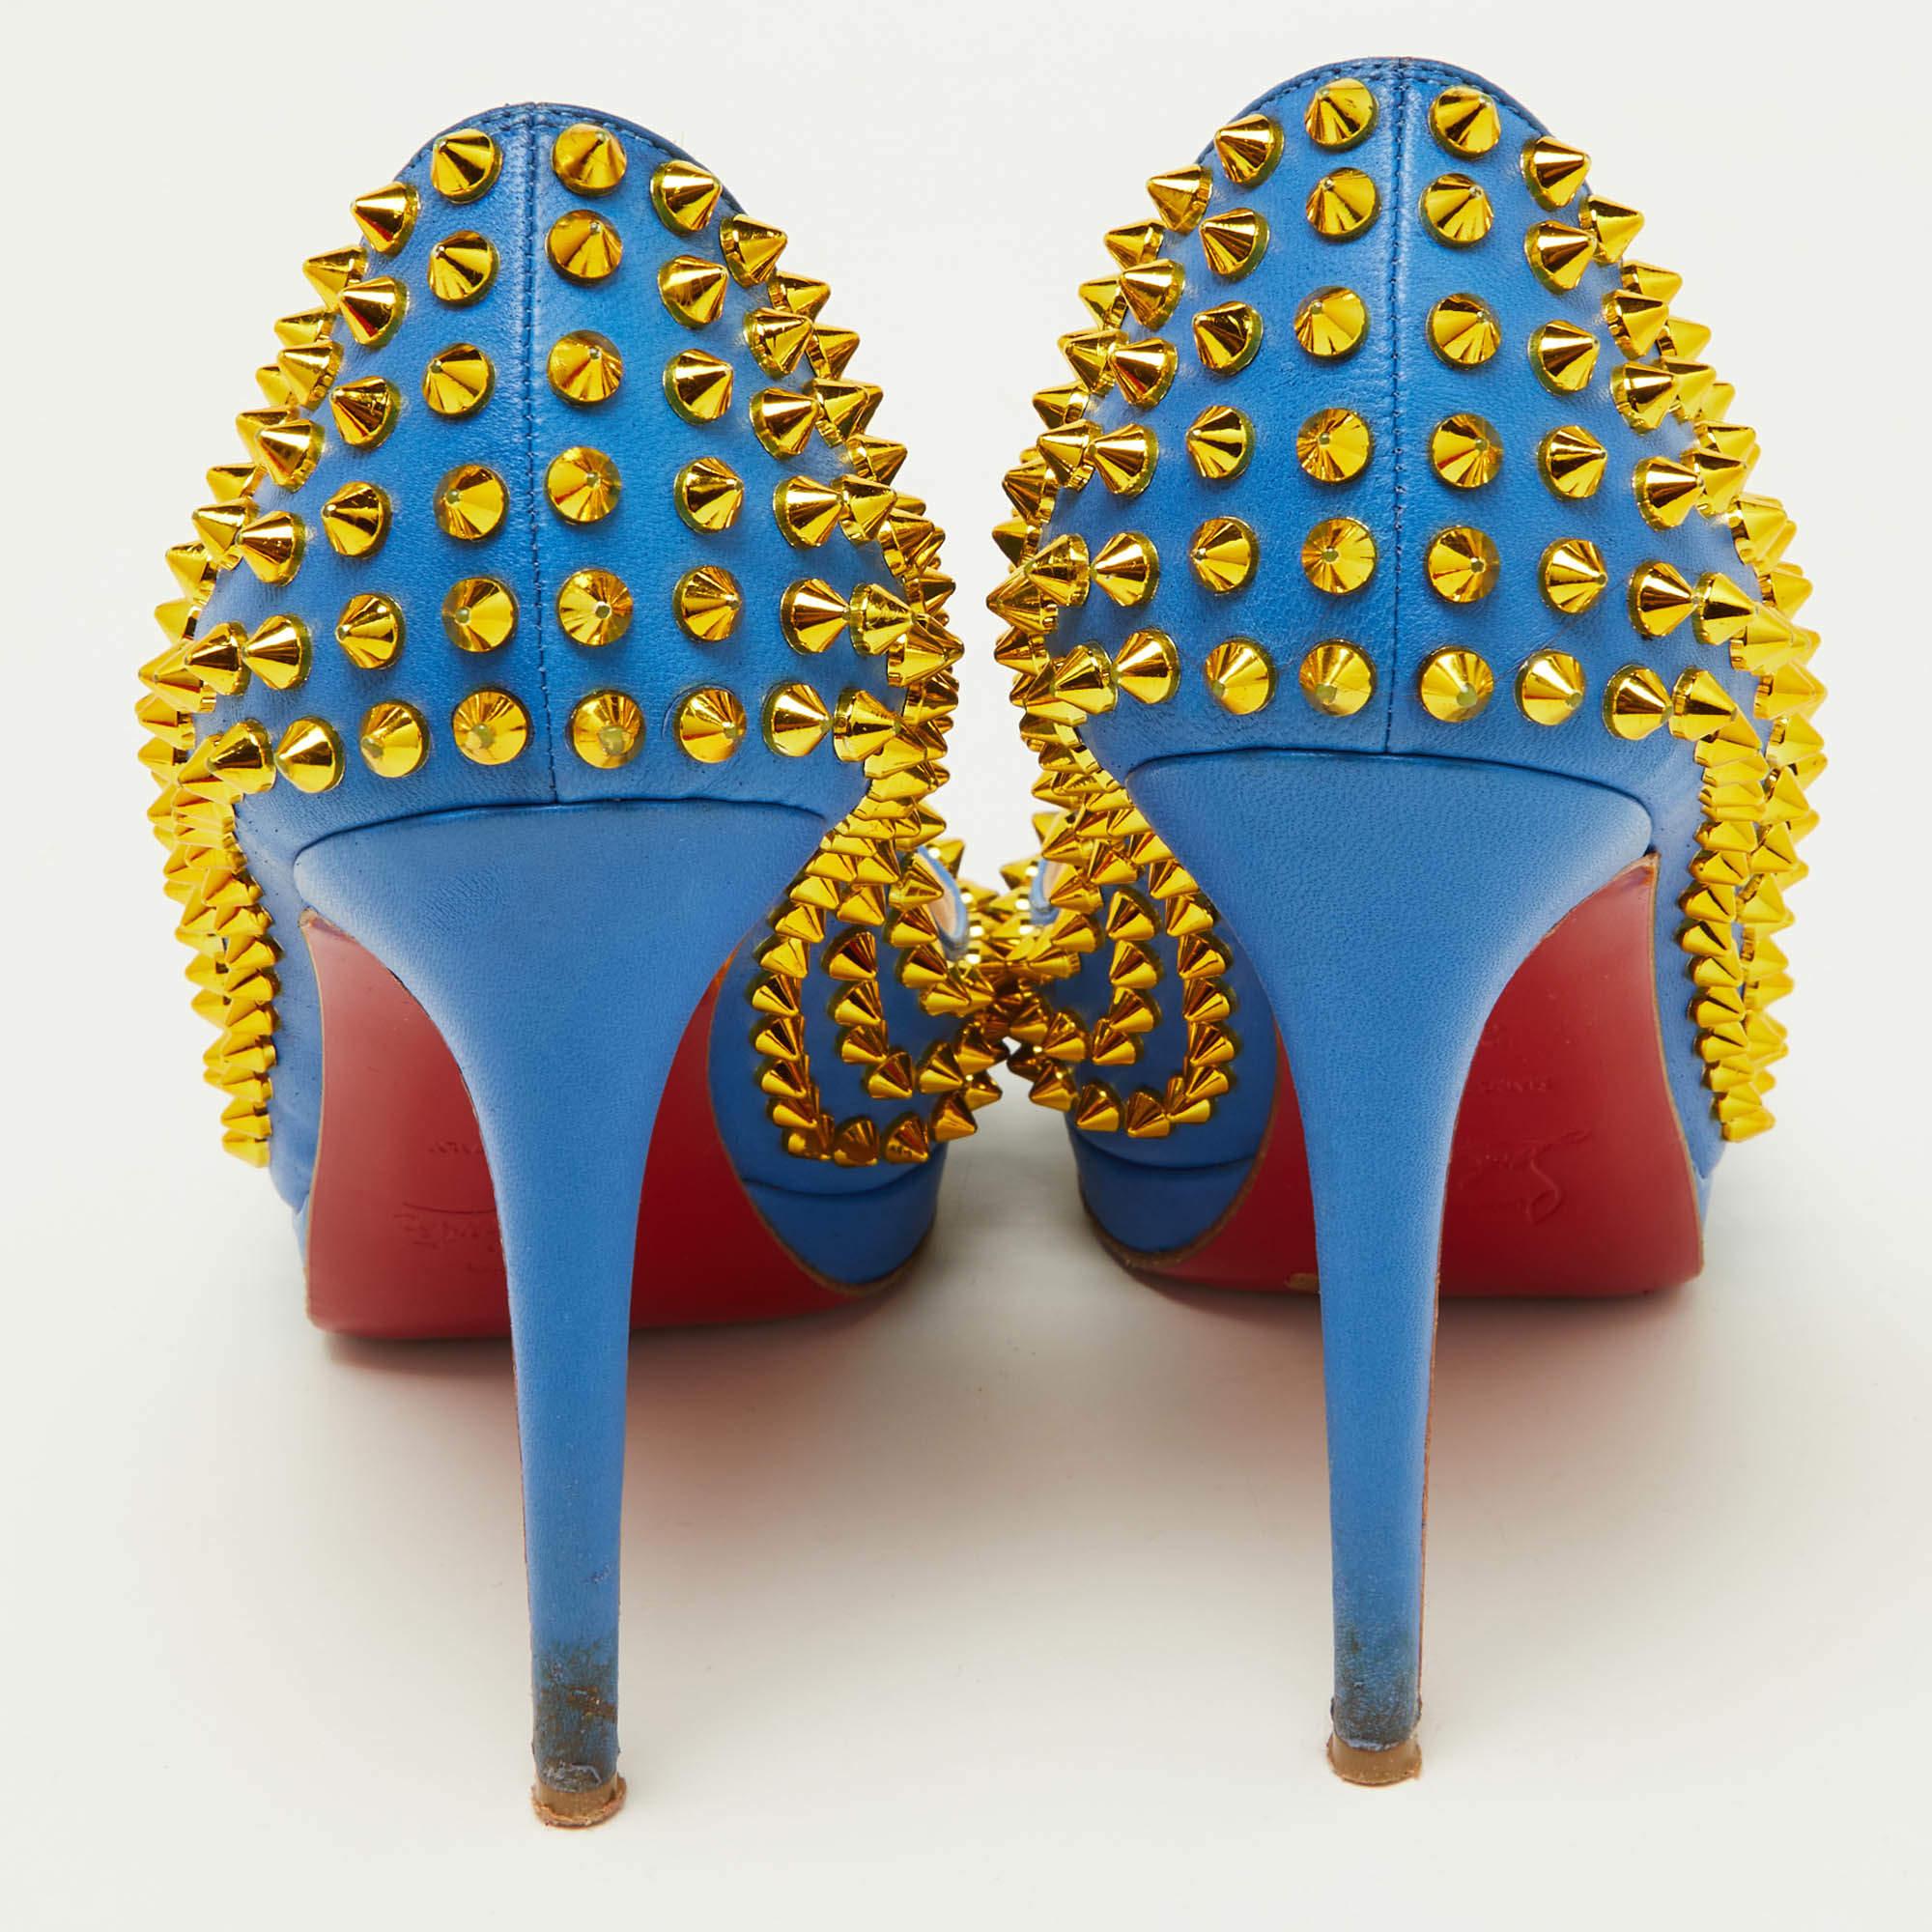 Christian Louboutin Blue Leather Yolanda Spikes Pumps Size 37.5 For Sale 2